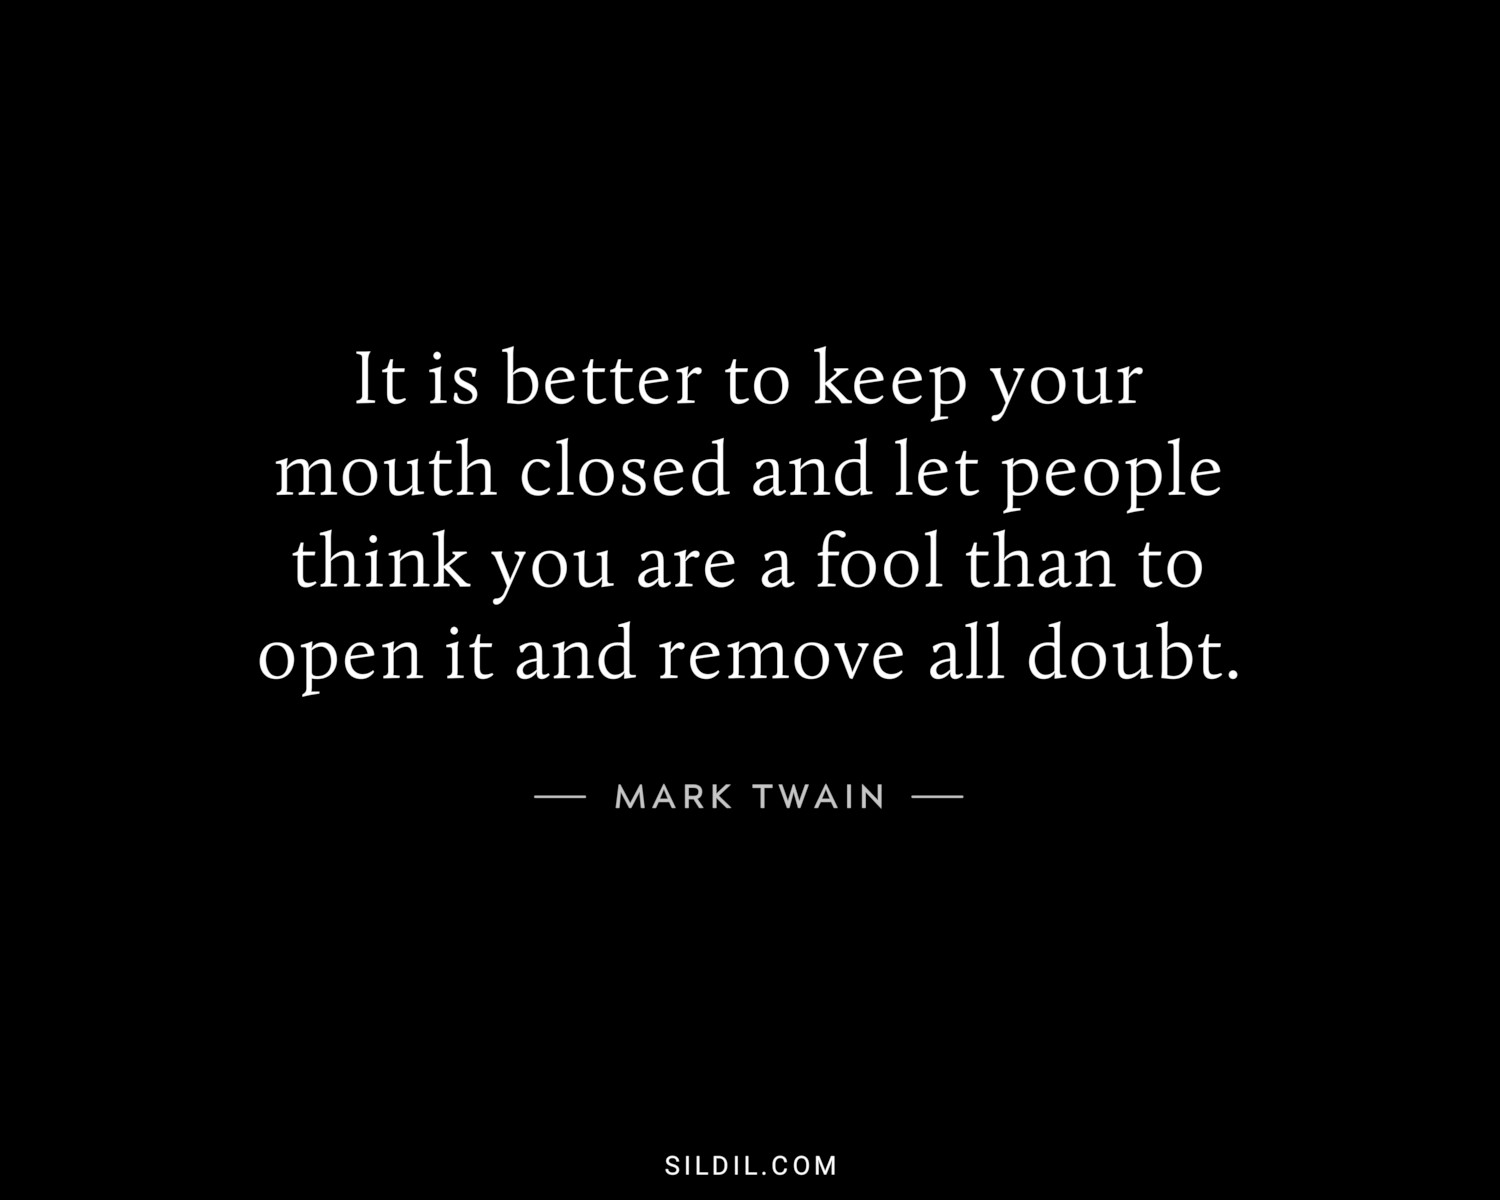 It is better to keep your mouth closed and let people think you are a fool than to open it and remove all doubt.